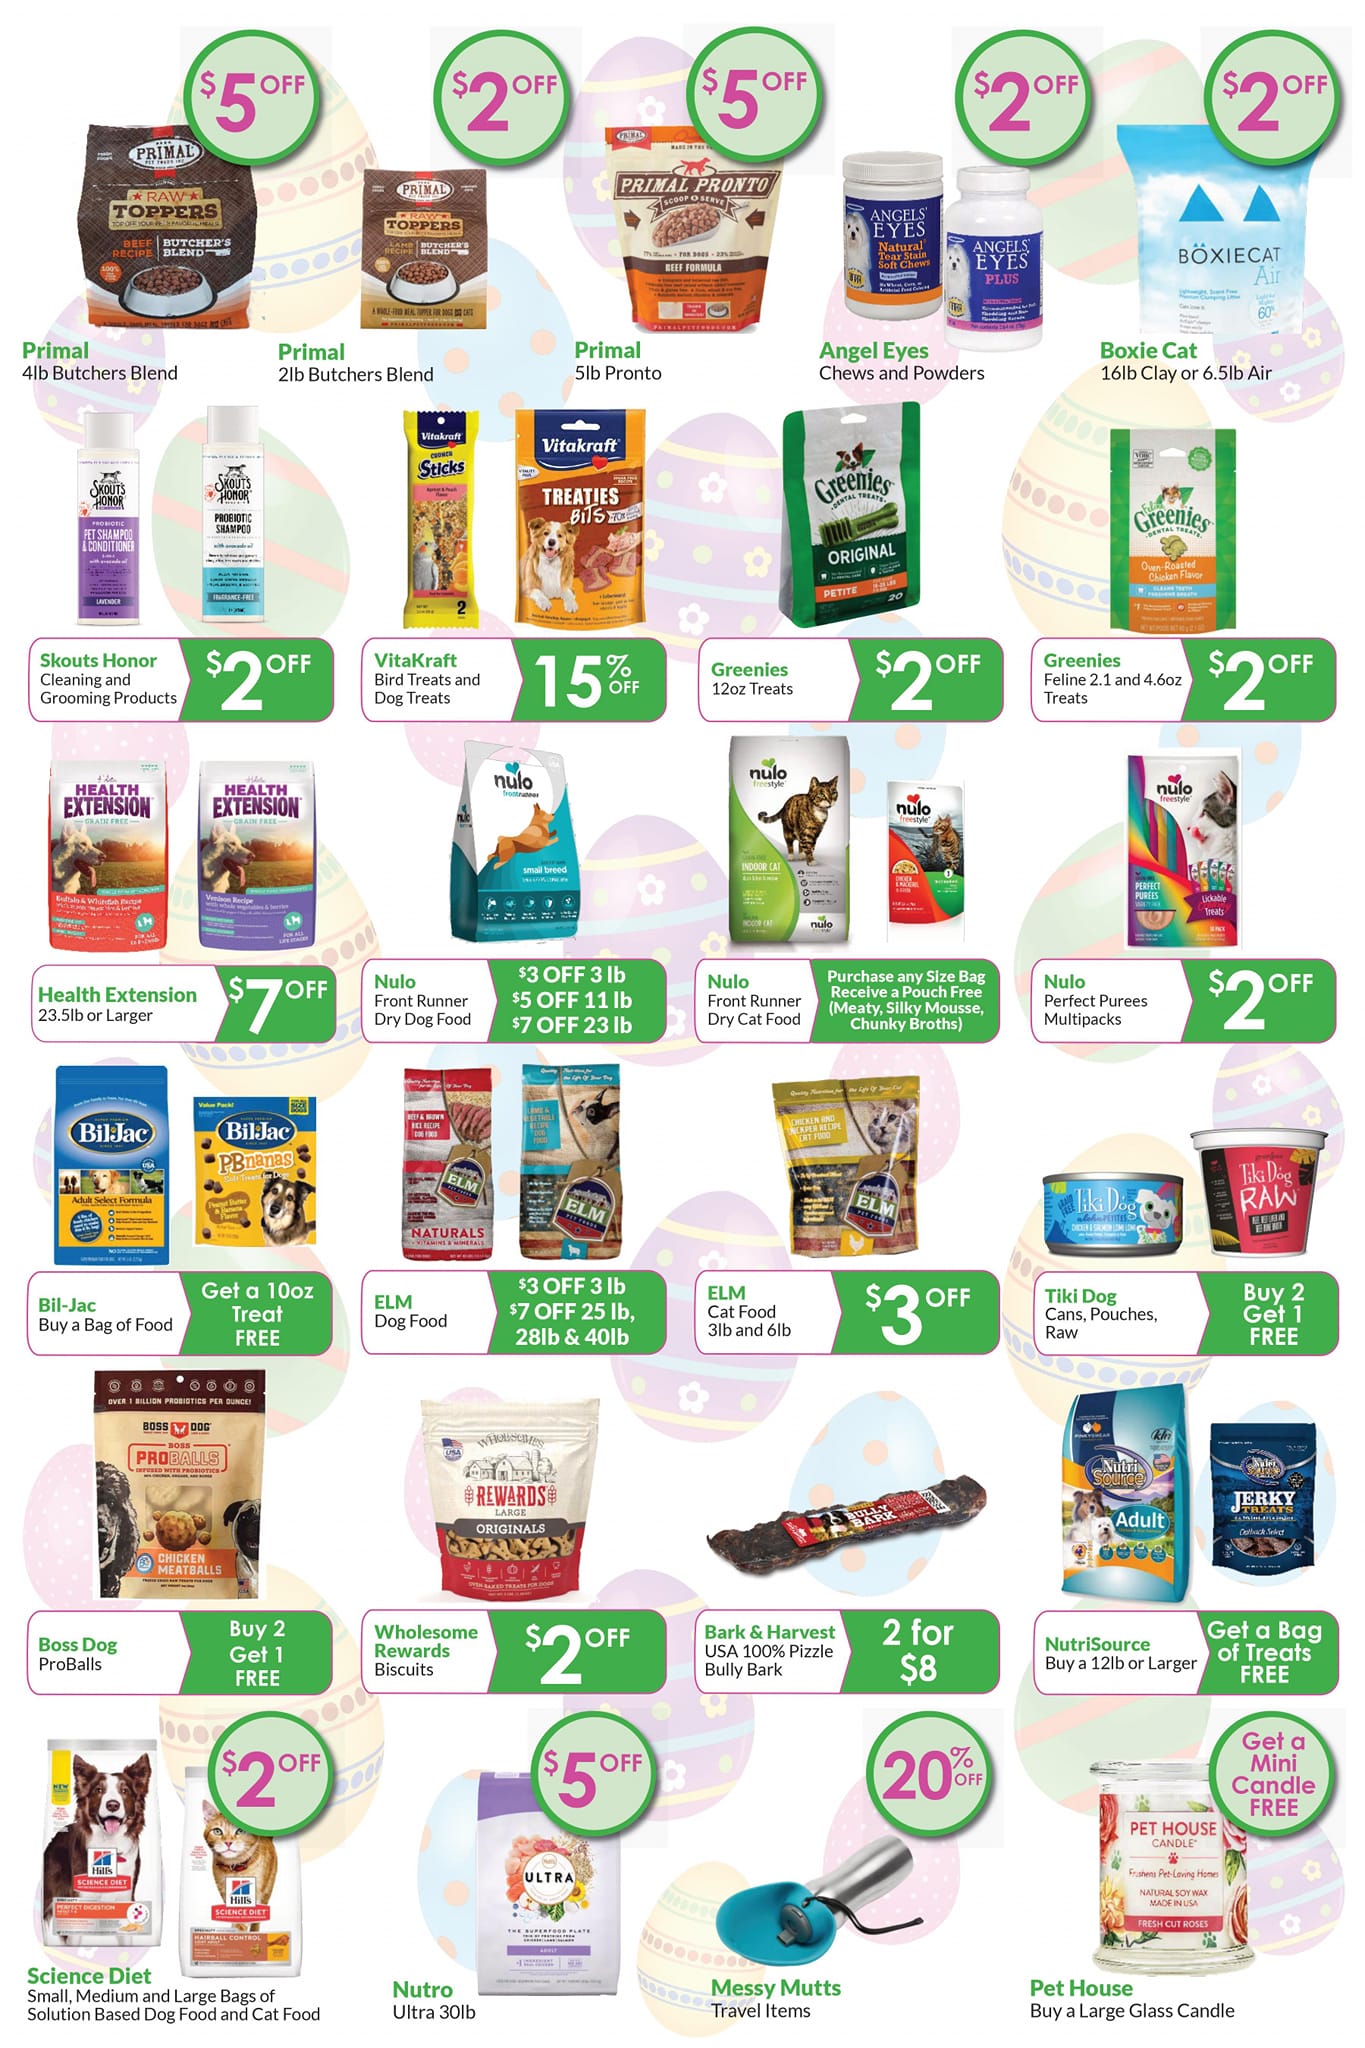 Concord Pet Foods & Supplies